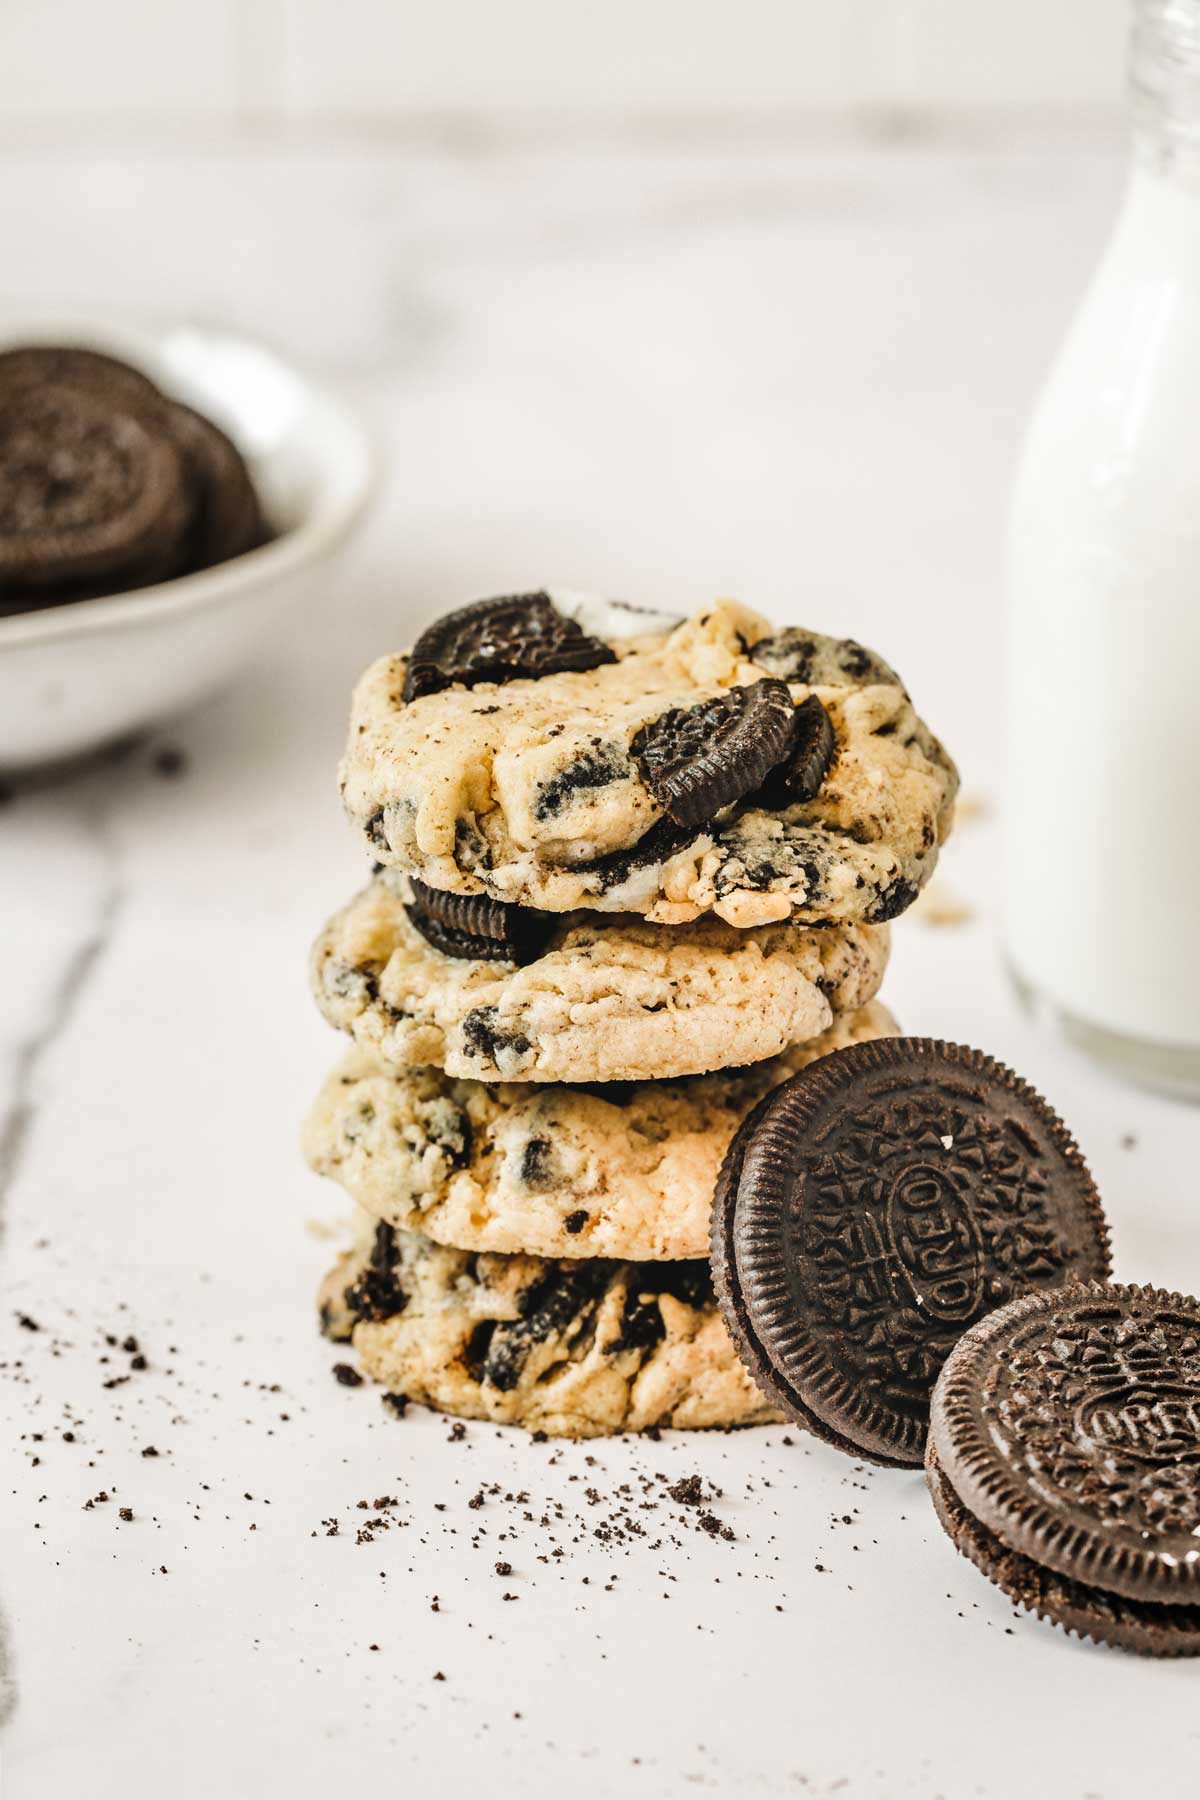 Best Oreo Chocolate Chip Cookies - Soft & Chewy - Sweetly Cakes